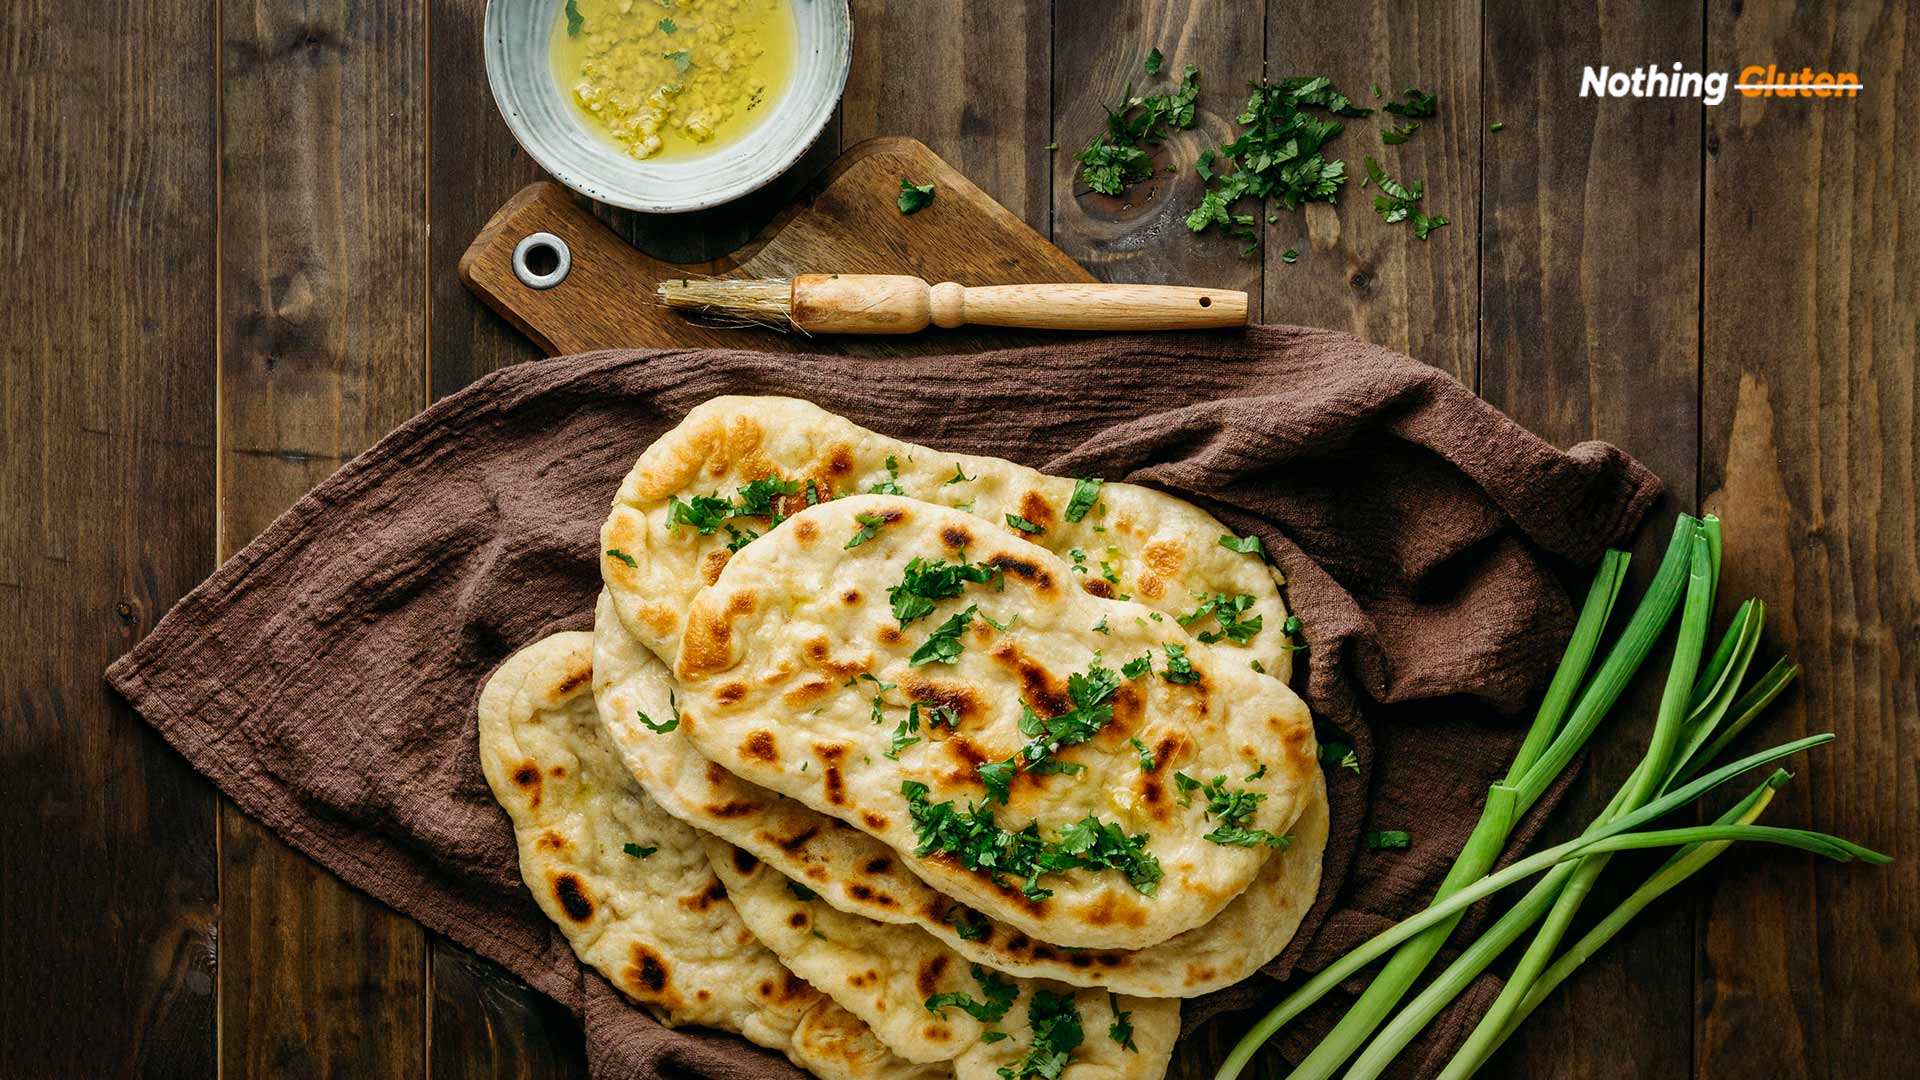 Gluten Free Naan Recipe To Try At Home 